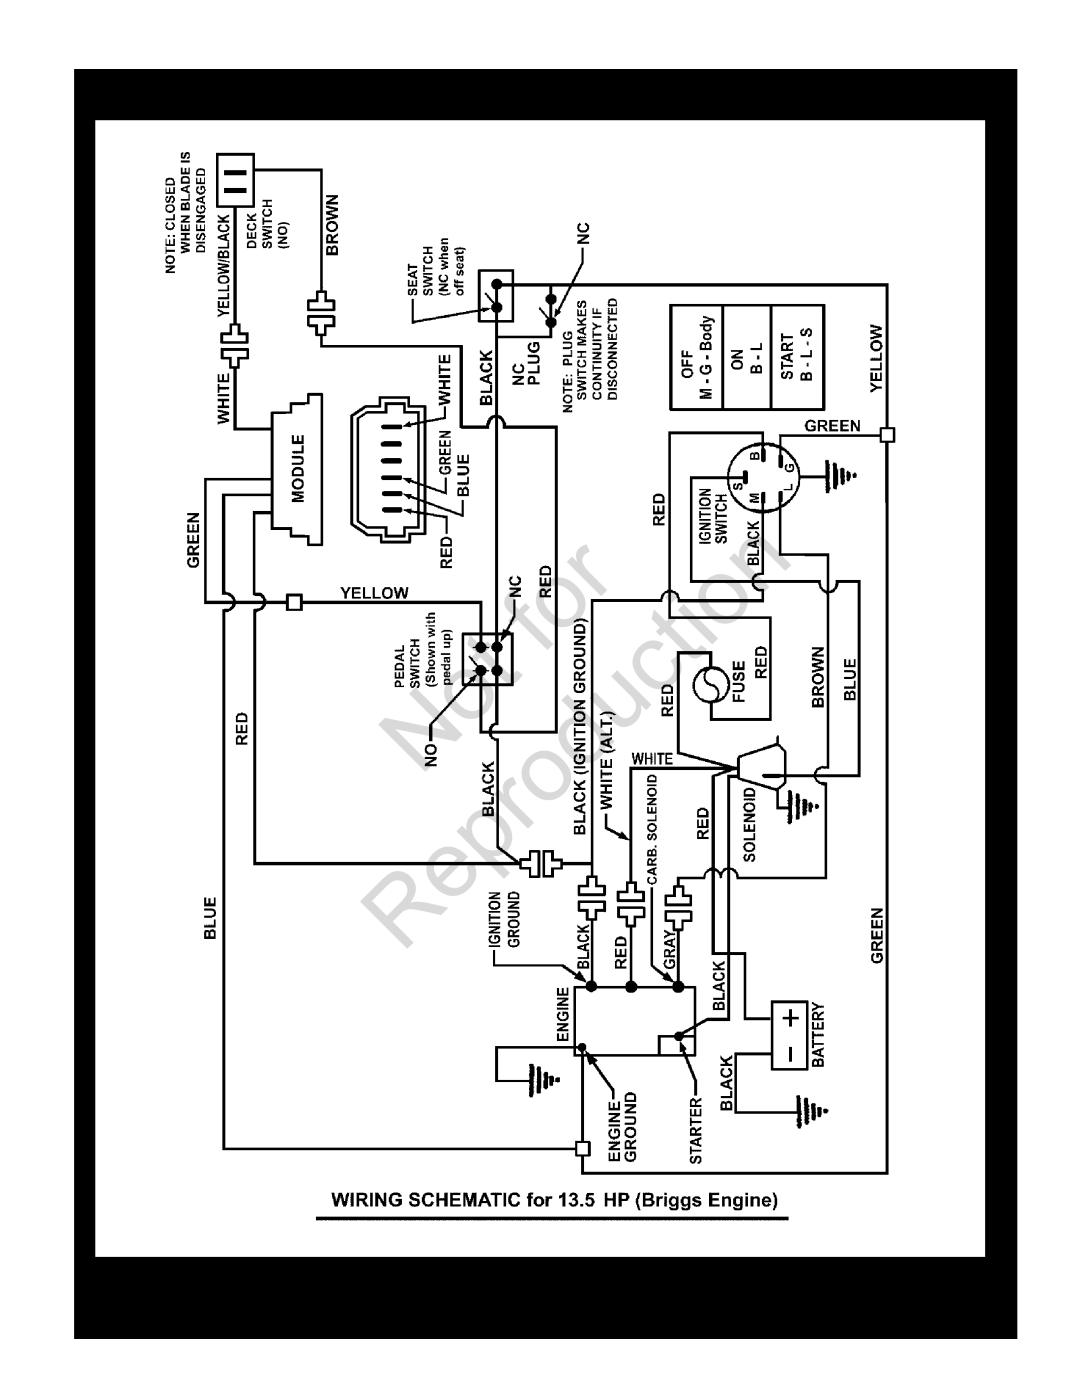 Snapper 84873, 84941, 85623, 84875 Wiring Schematic 13.5HP Briggs, Reproduction, Manual No, 7006278, Standard Deck, Series 